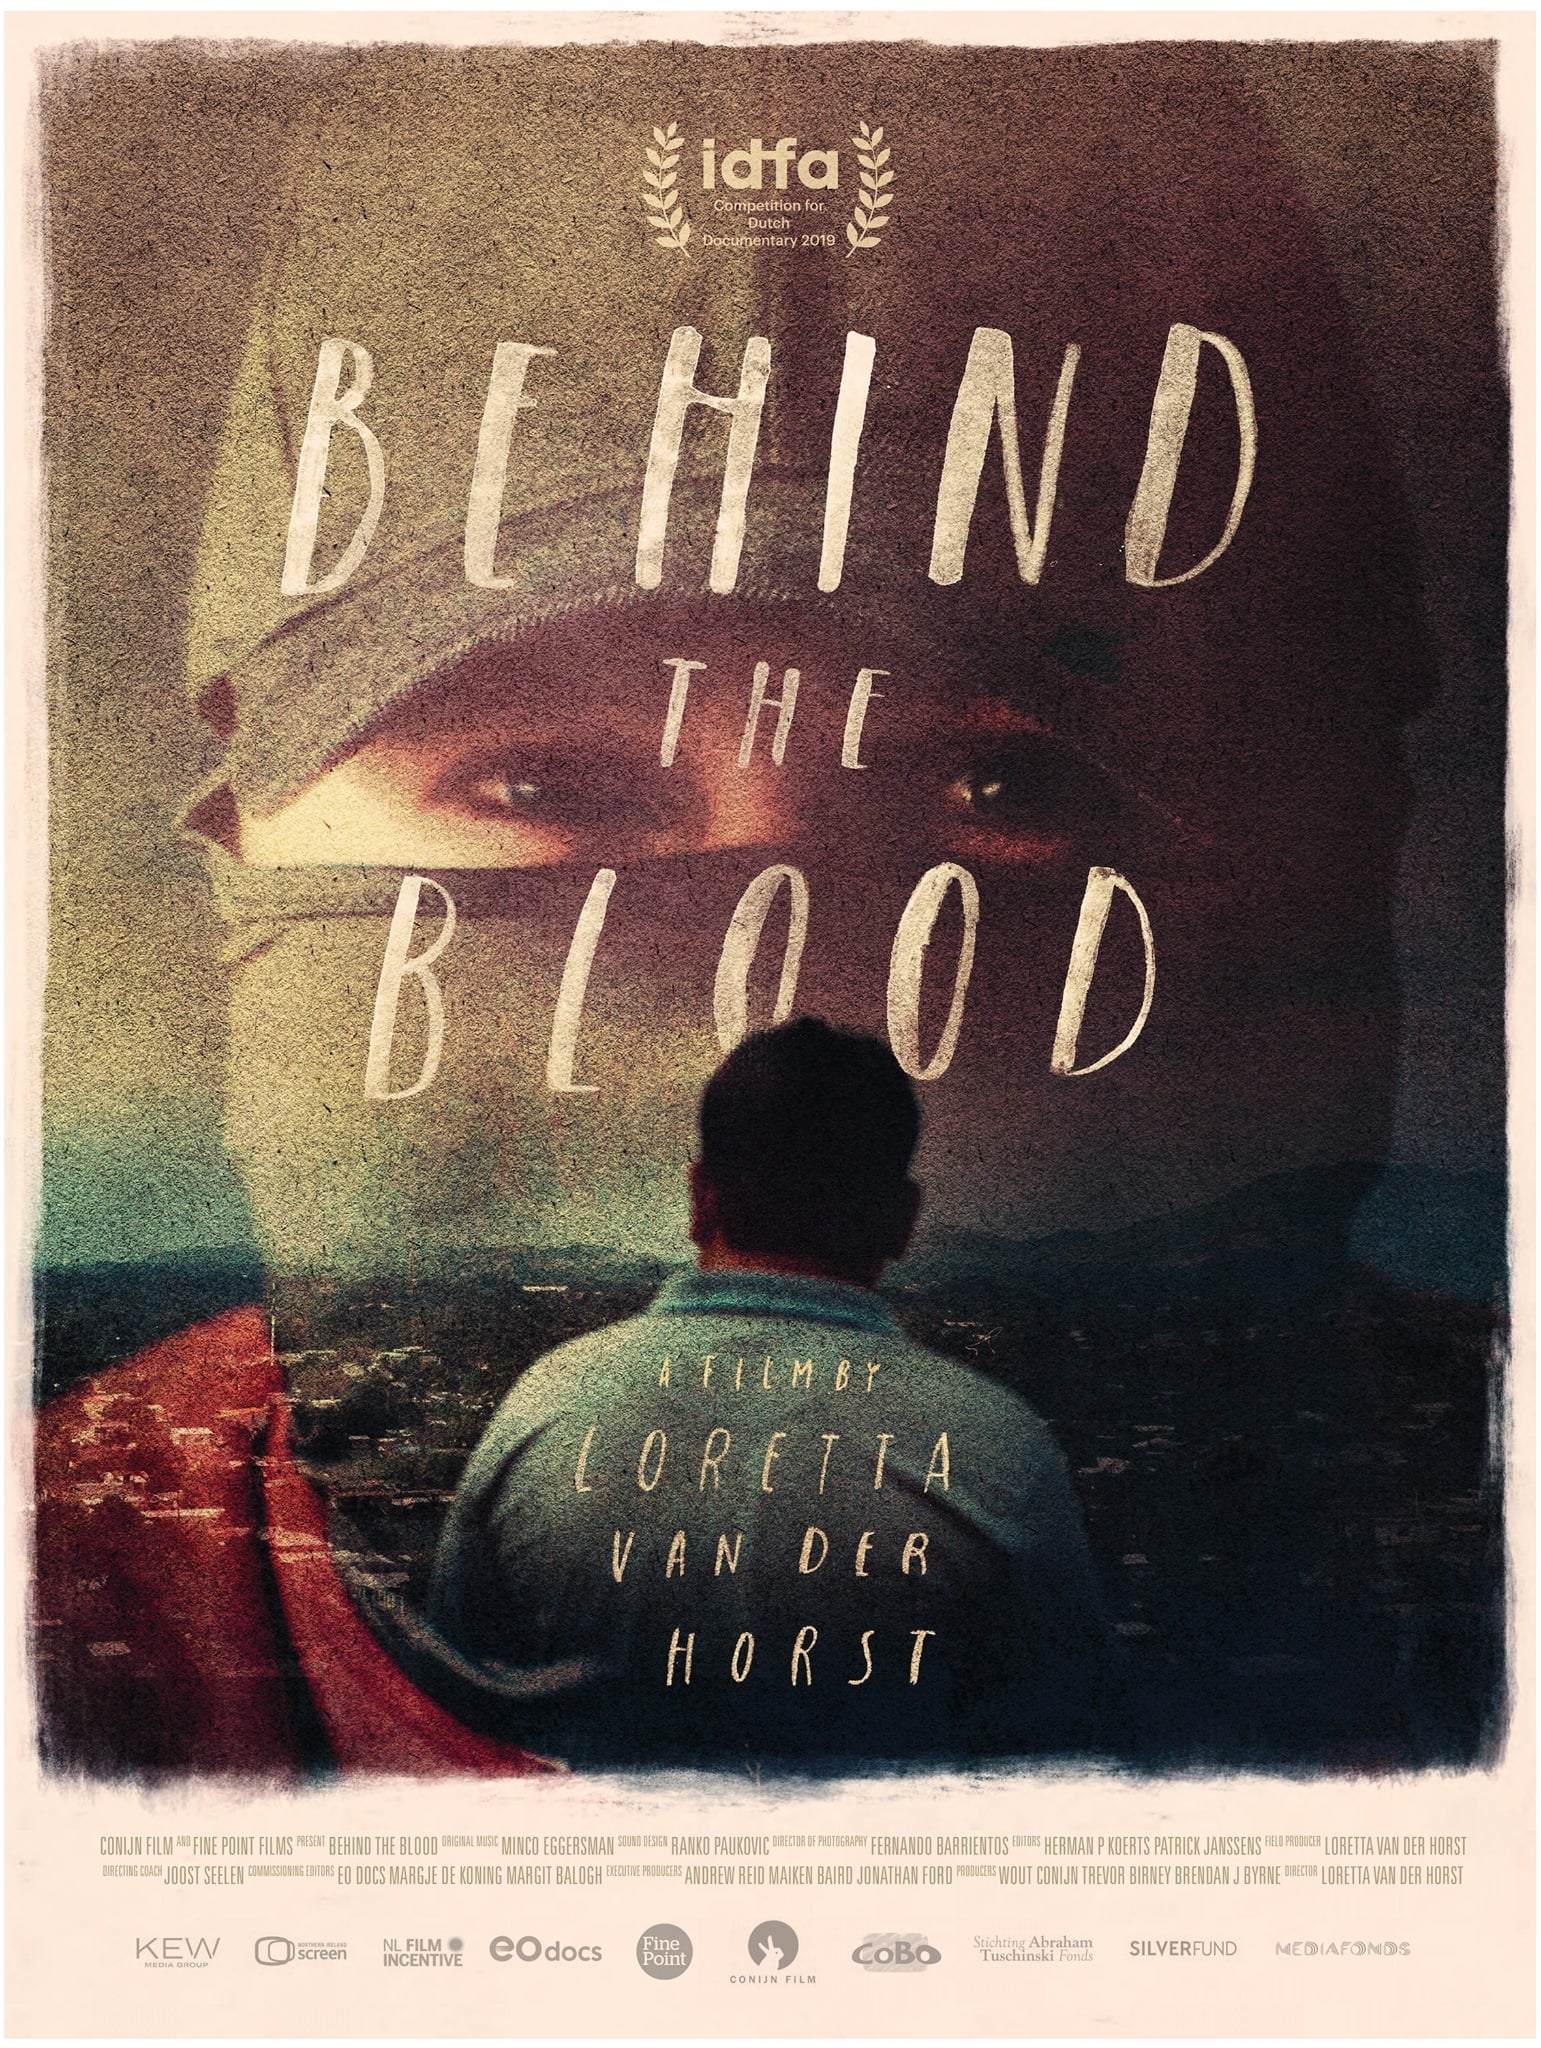 Behind the Blood